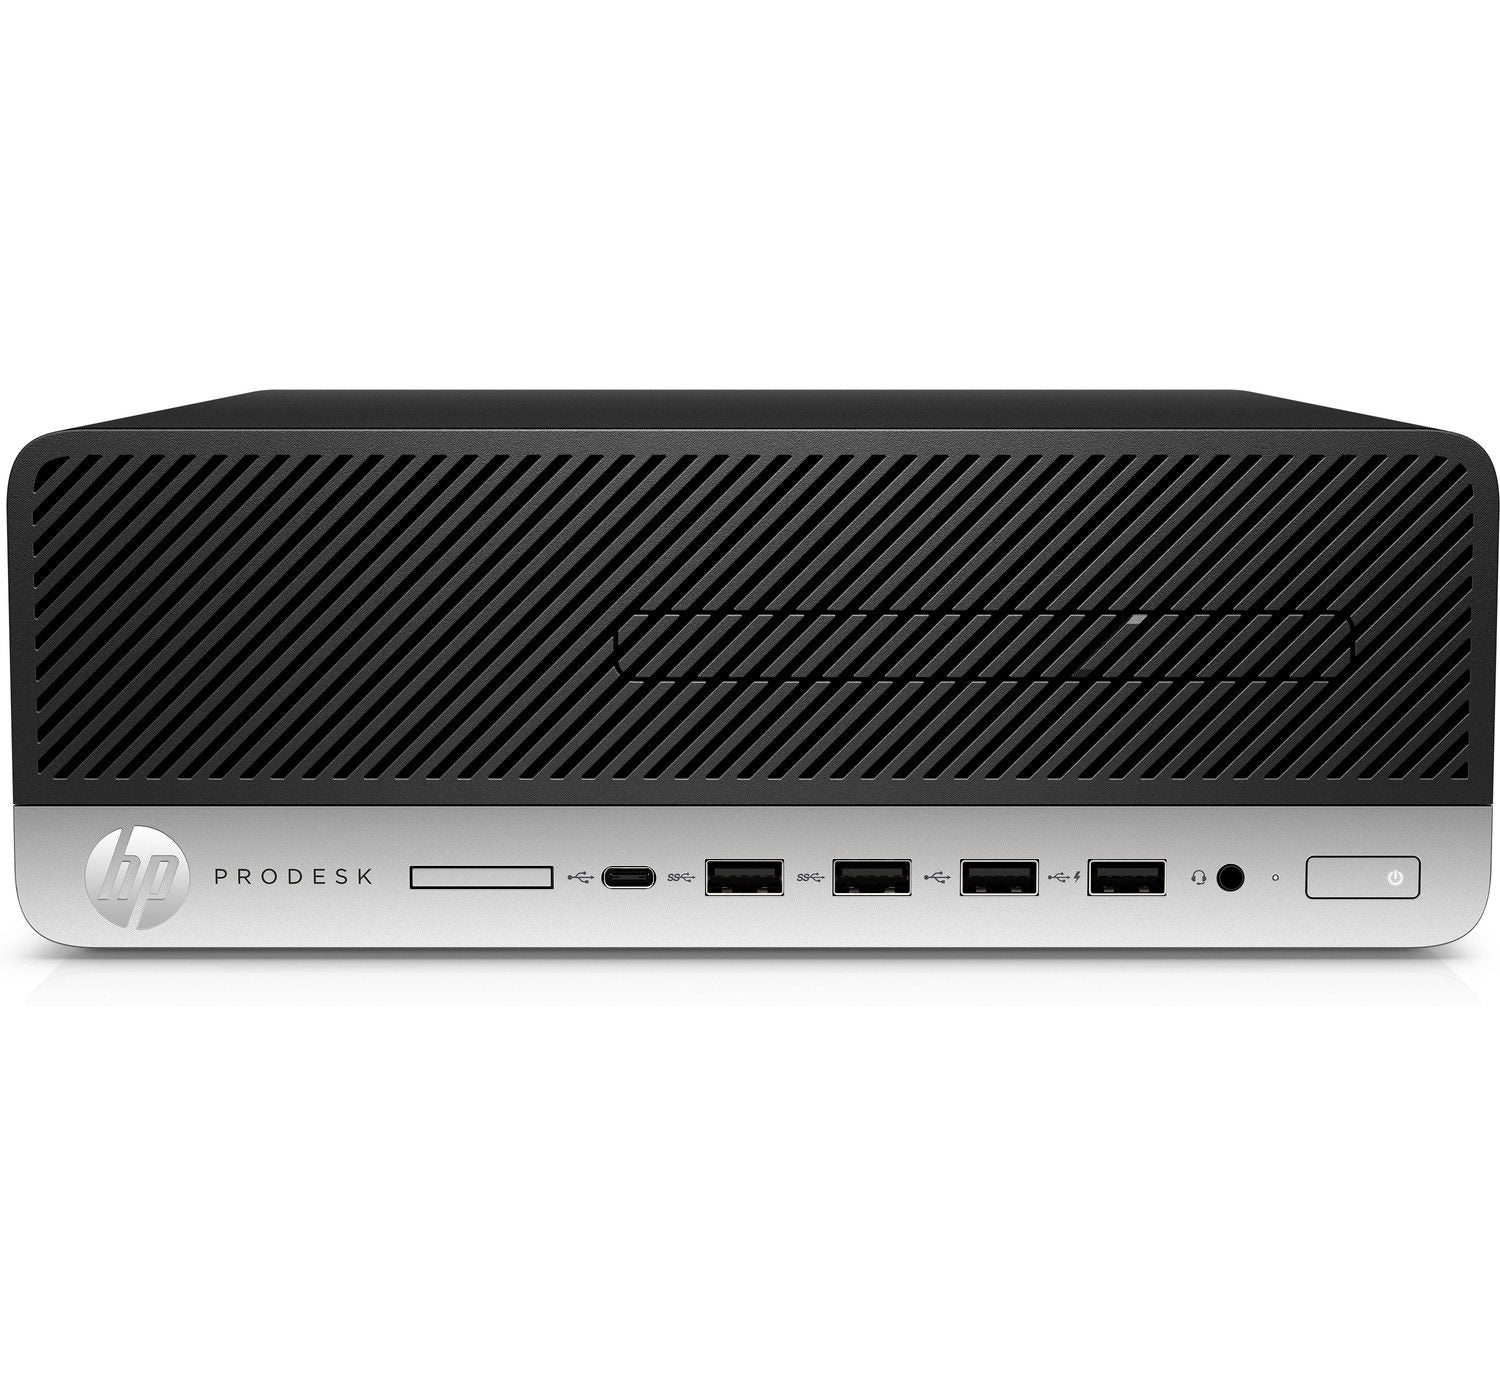 HP ProDesk 600 G4 SFF | Intel Core i7-8700 3.2Ghz | 8/16Gb Ram DDR4 | SSD 256/480Gb | Windows 10 Pro | So much power and design in a single product